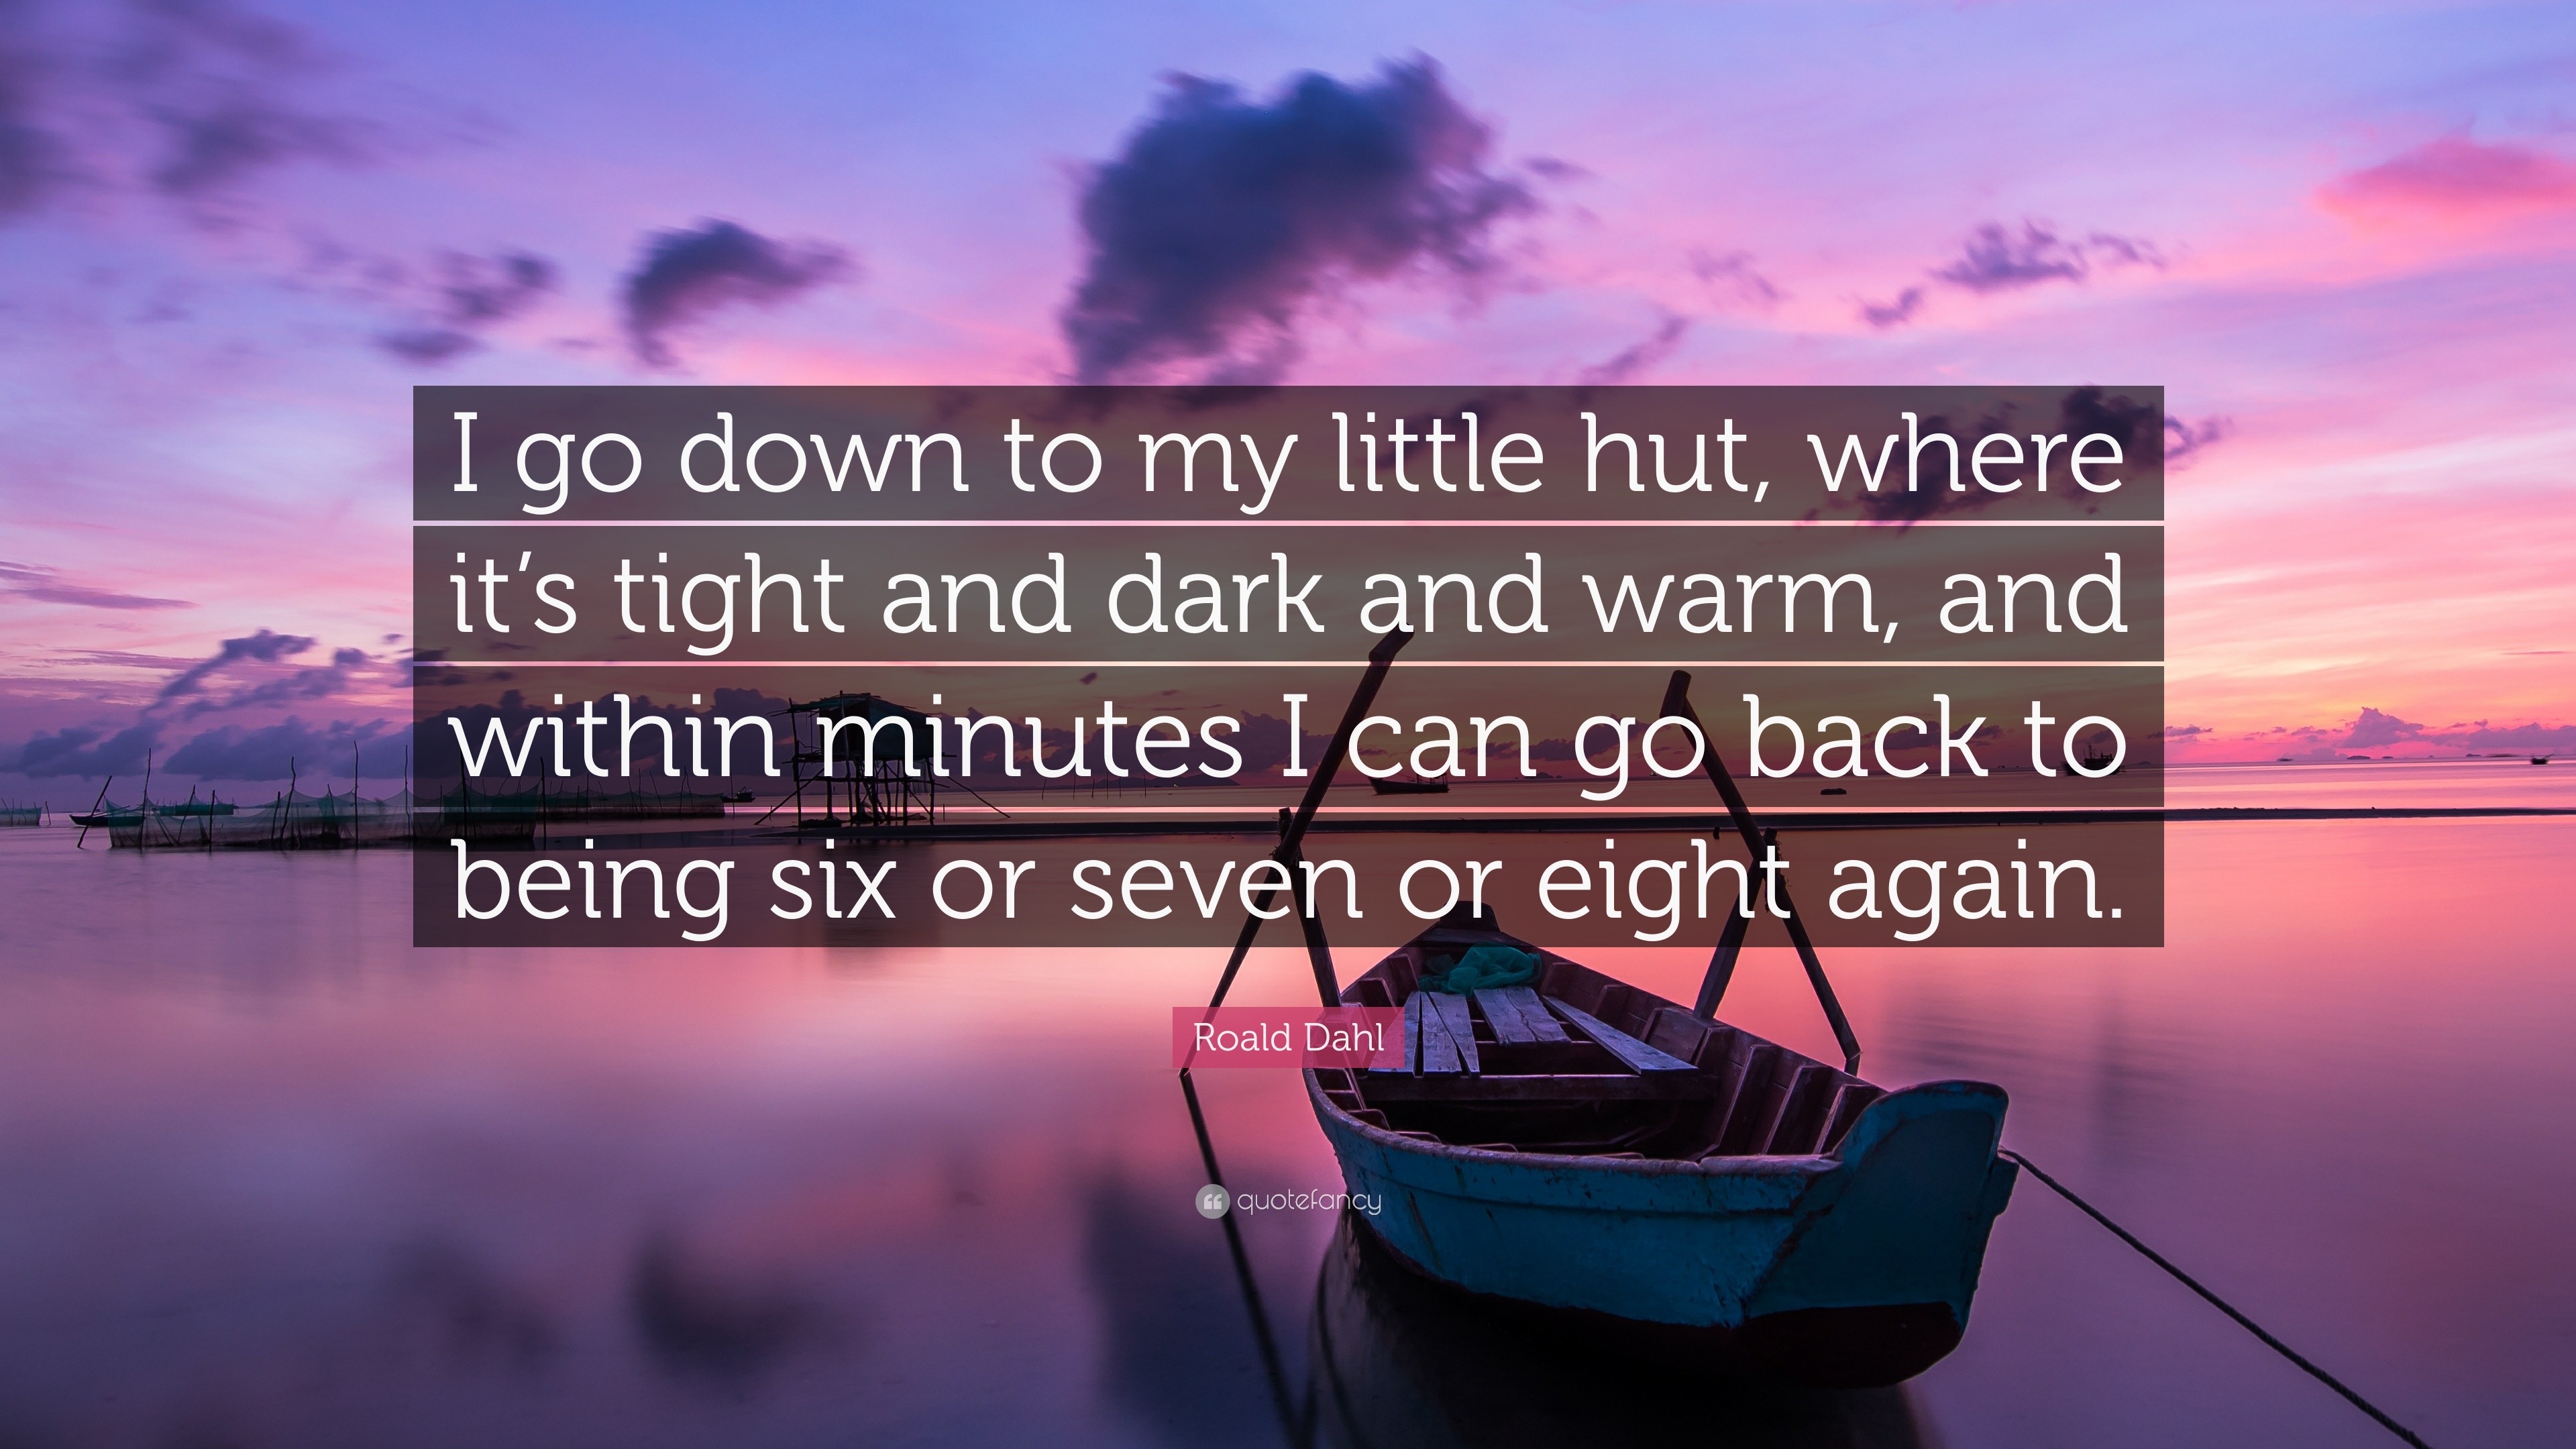 Roald Dahl Quote: “I go down to my little hut, where it’s tight and ...